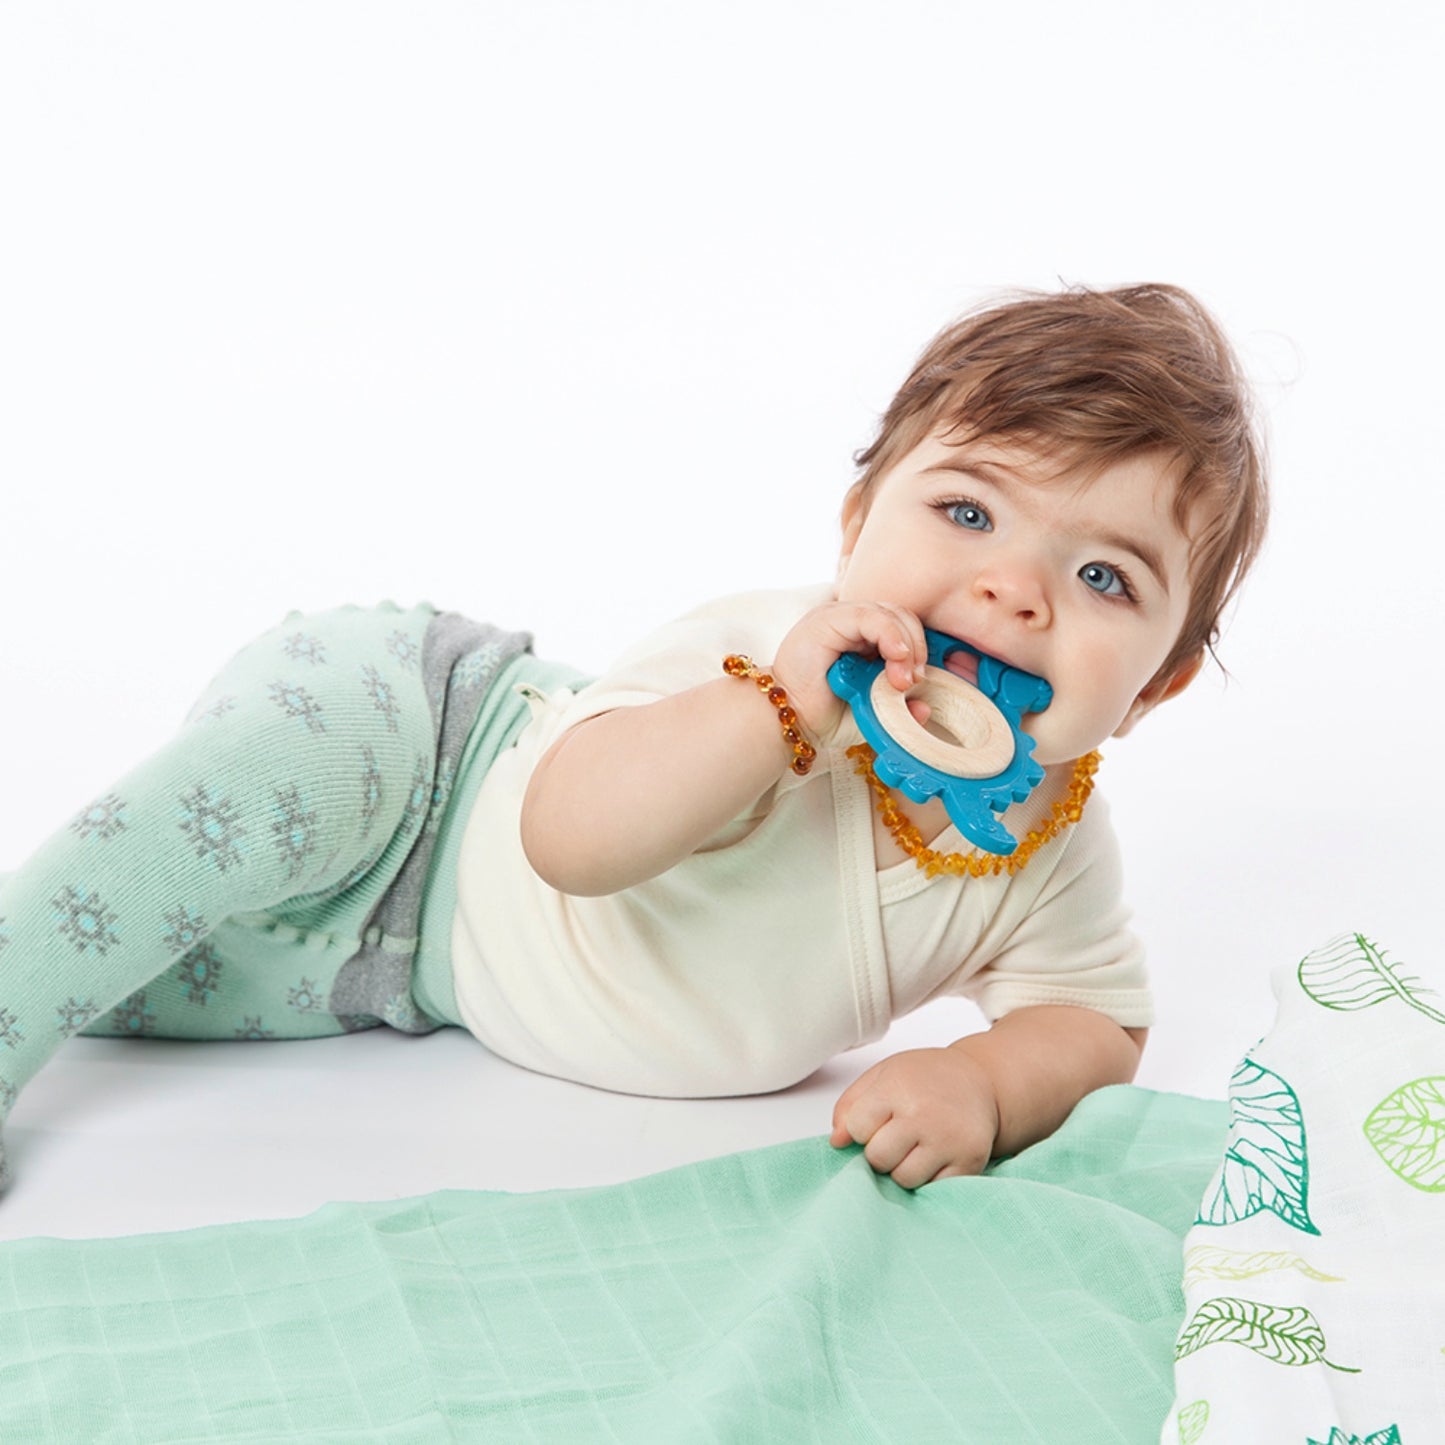 Grunspecht Dinosaur Organic Rubber and Beech Wood Baby Teether | Lifestyle: Baby with Teething Toy | BeoVERDE Ireland